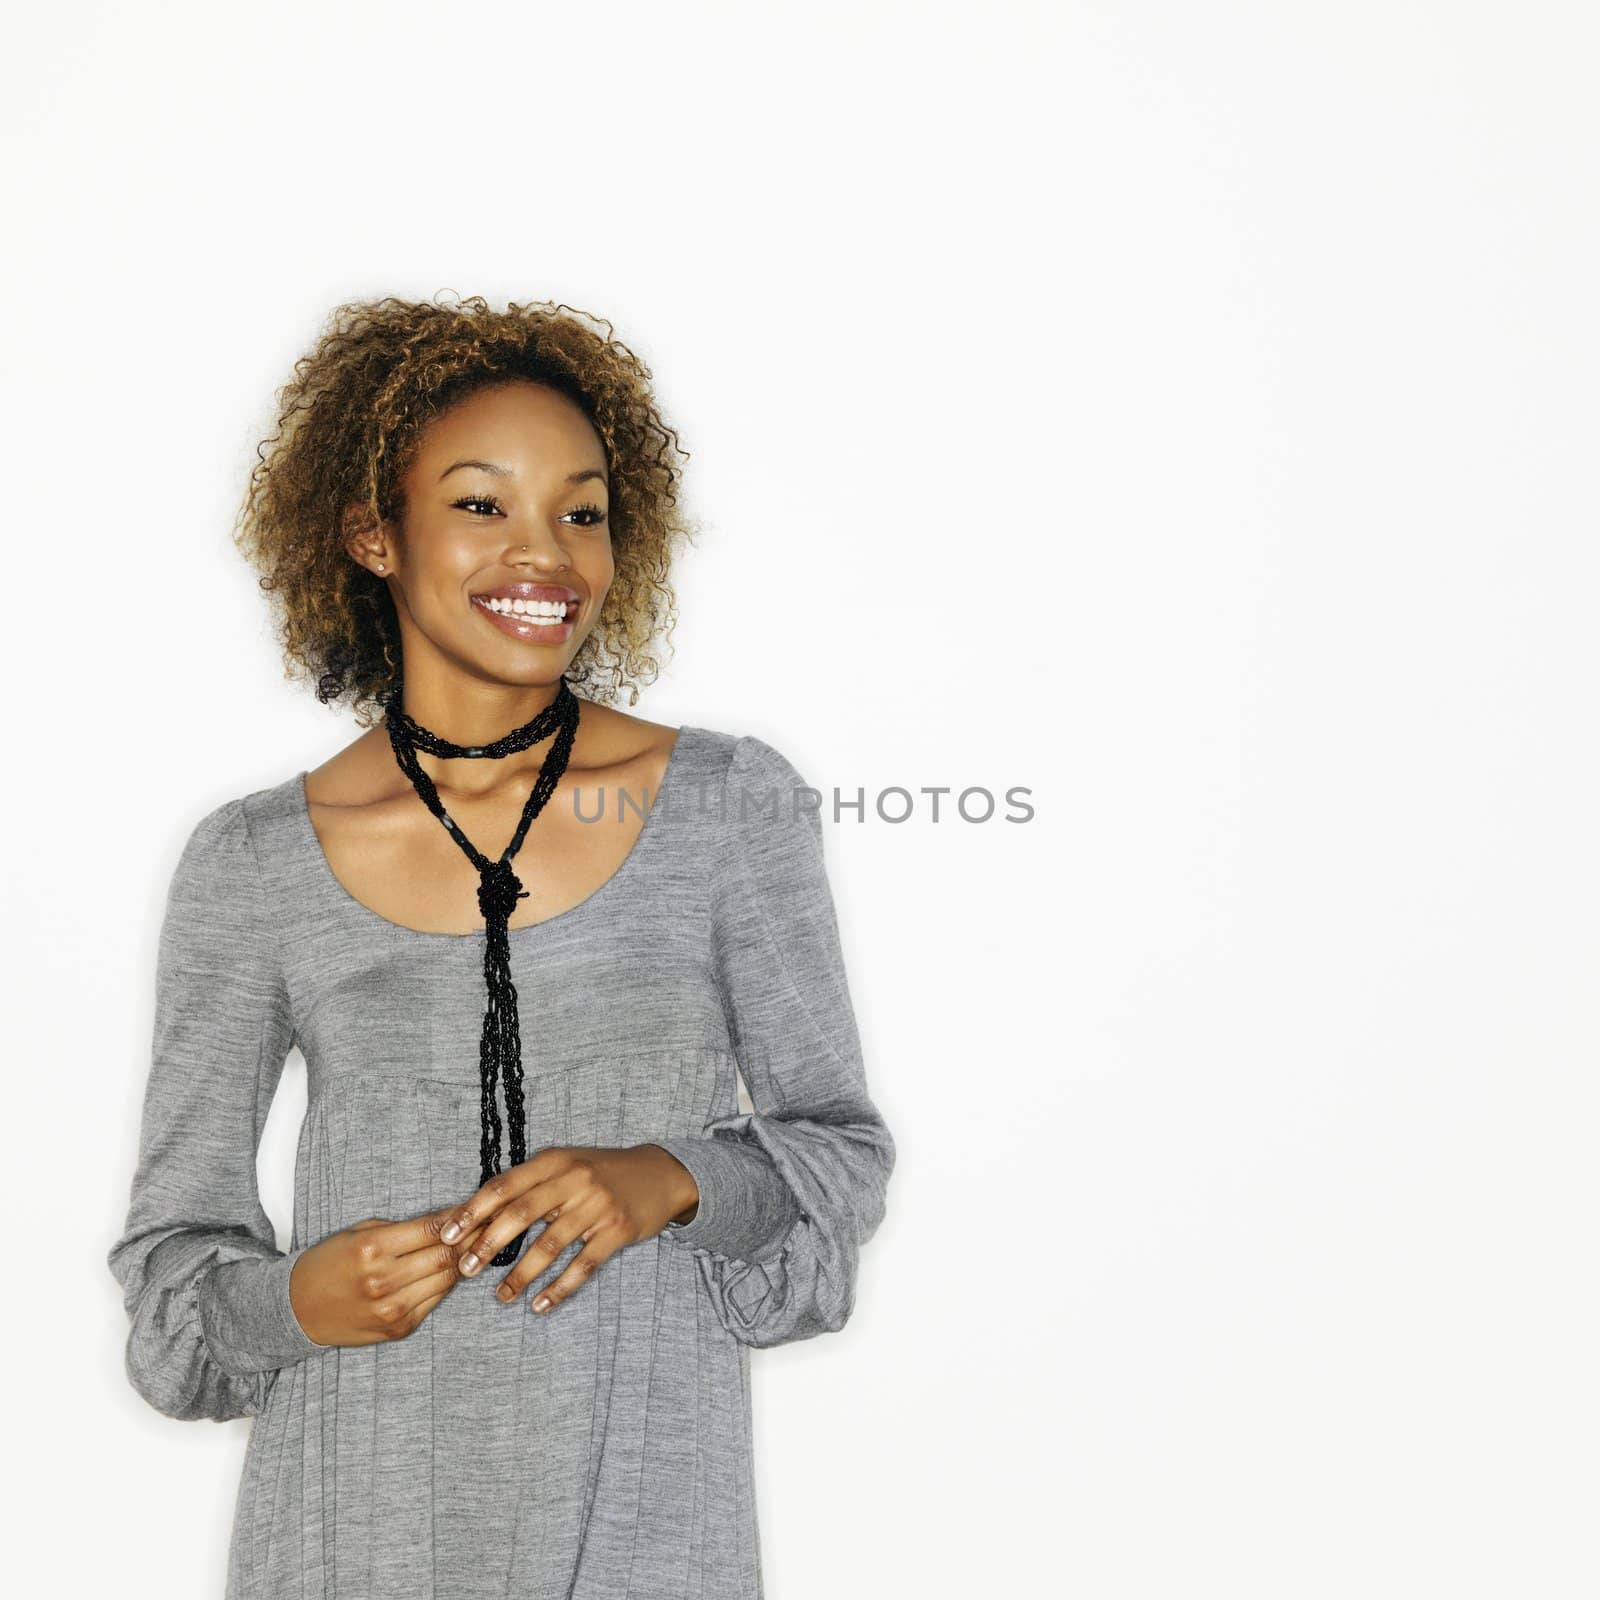 Portrait of pretty young woman smiling on white background.